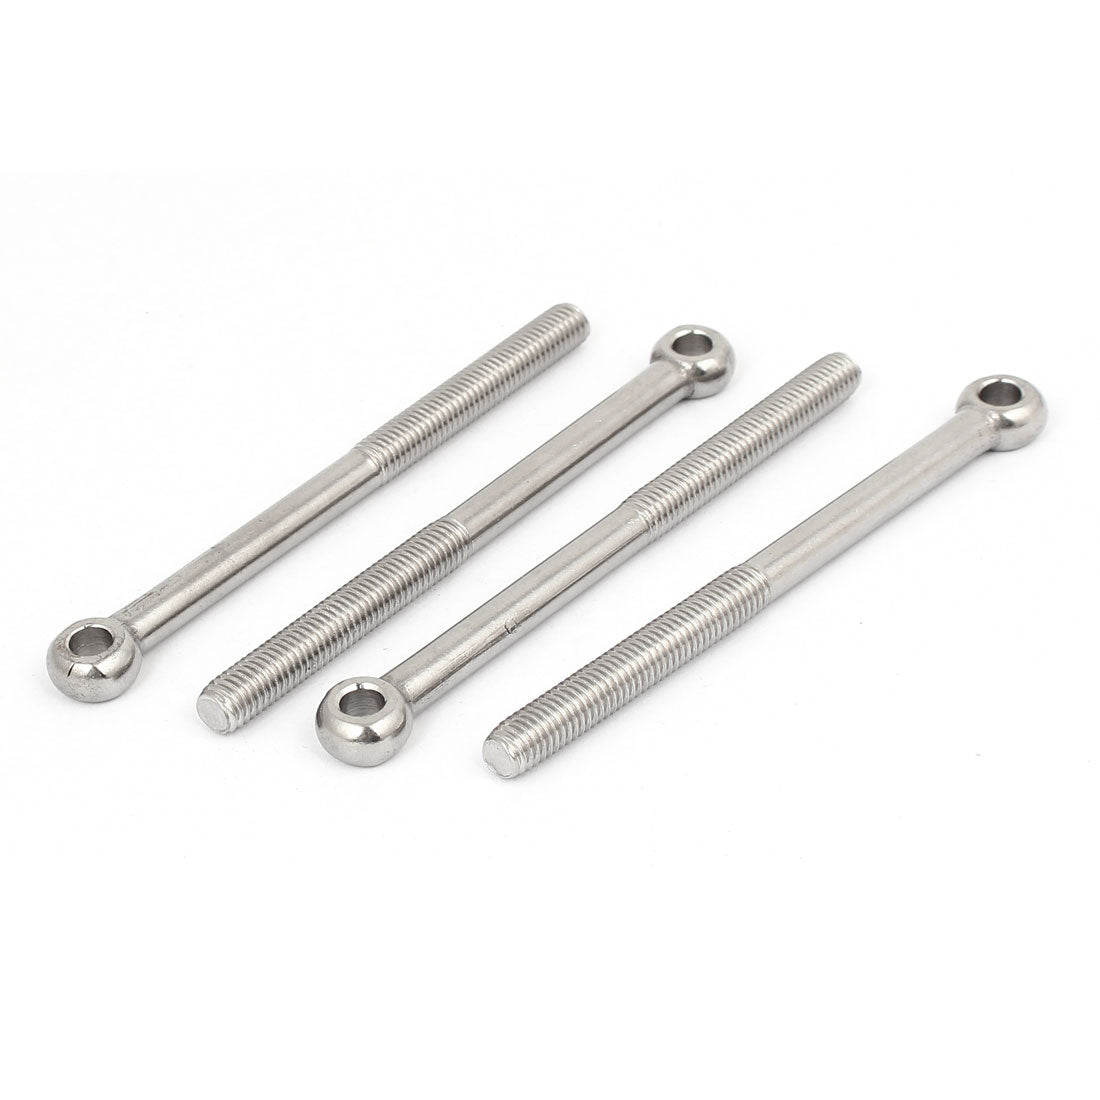 uxcell Uxcell M8 x 110mm 304 Stainless Steel Machine Shoulder Lift Eye Bolt Rigging 4pcs